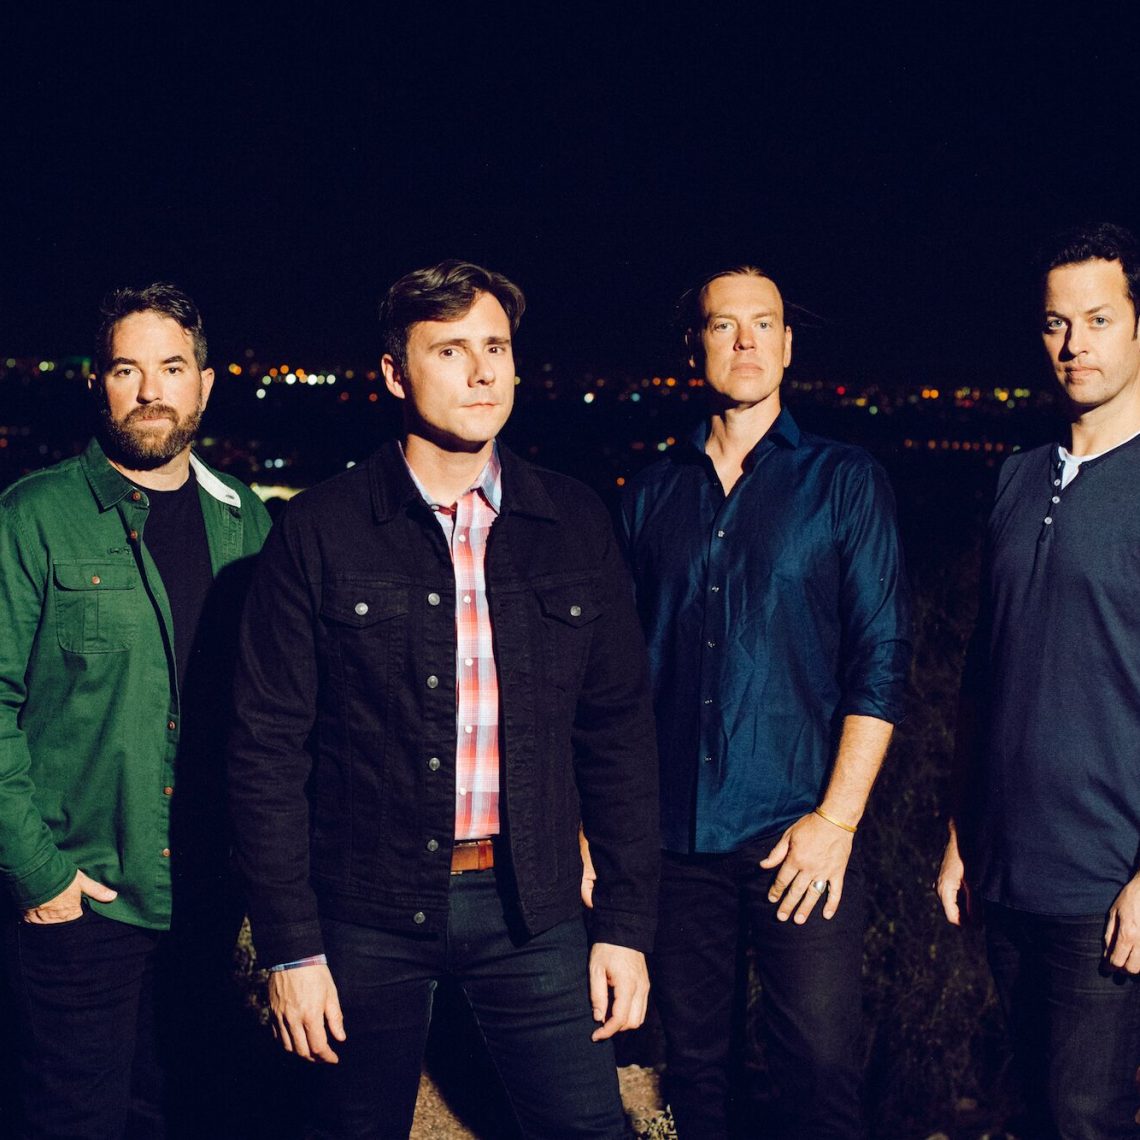 Jimmy Eat World announce new album ‘Surviving’ and UK shows